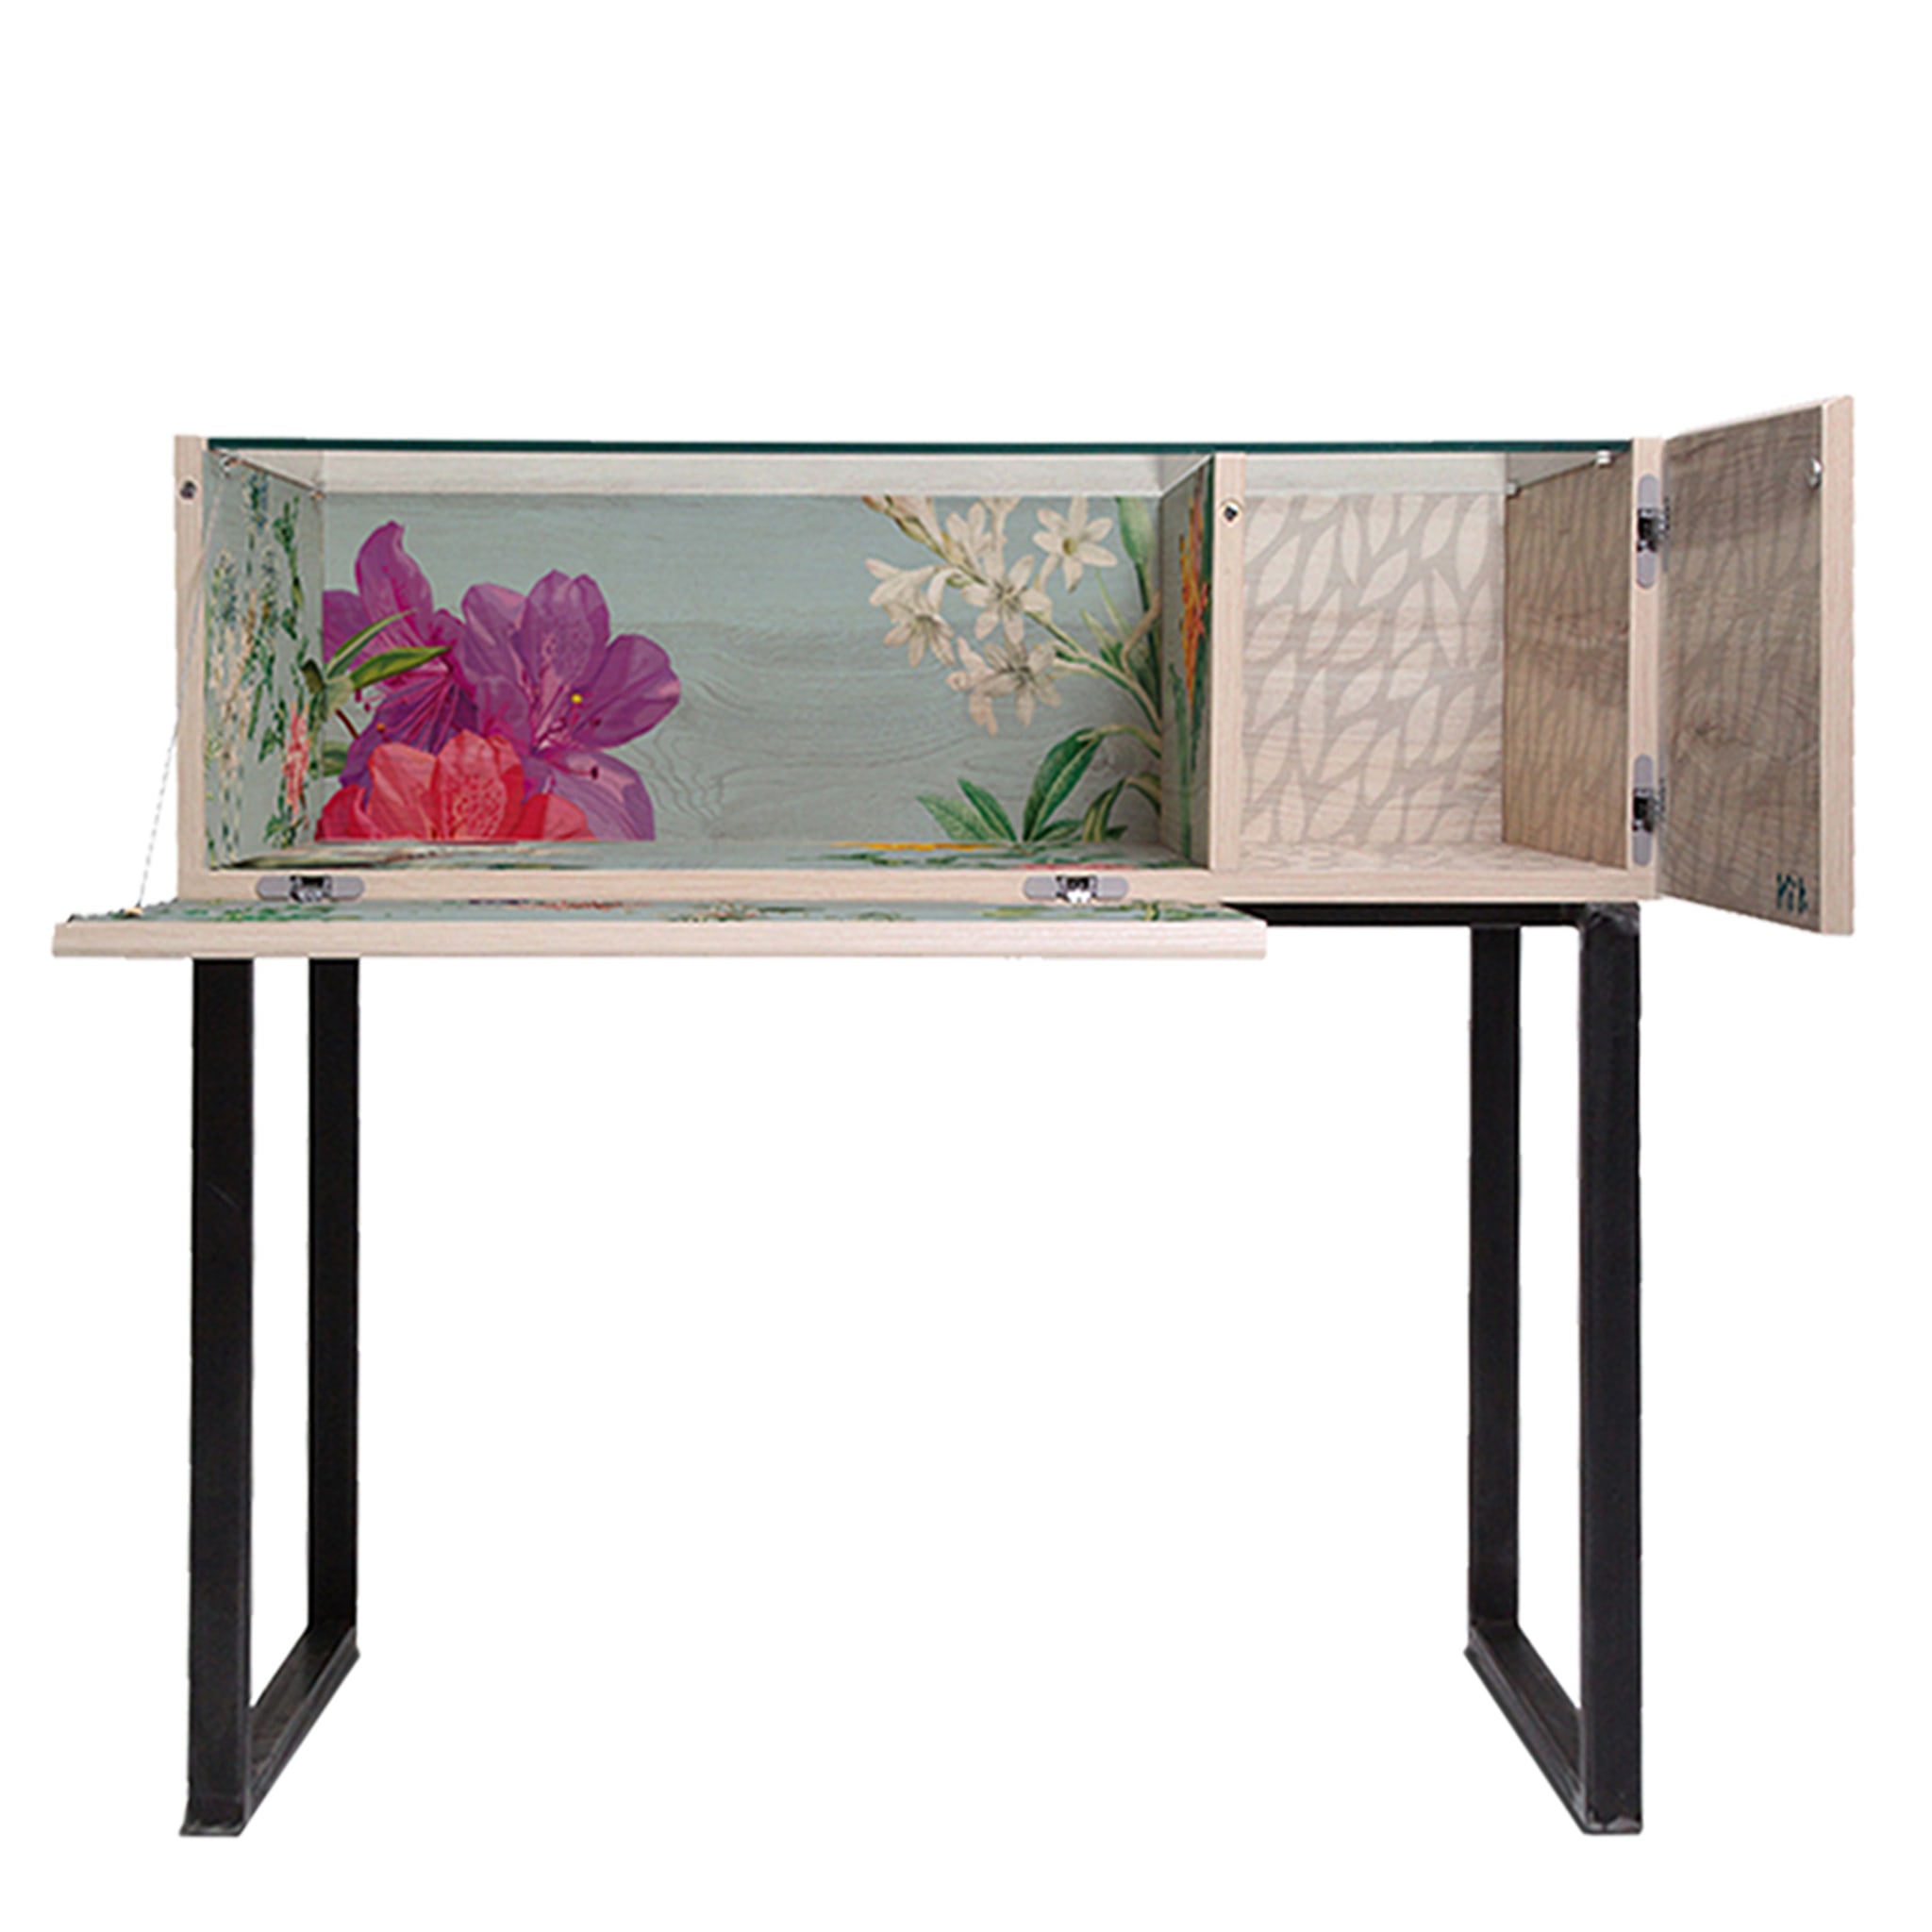 Duo Spring Console By Luciana Gomez - Alternative view 1